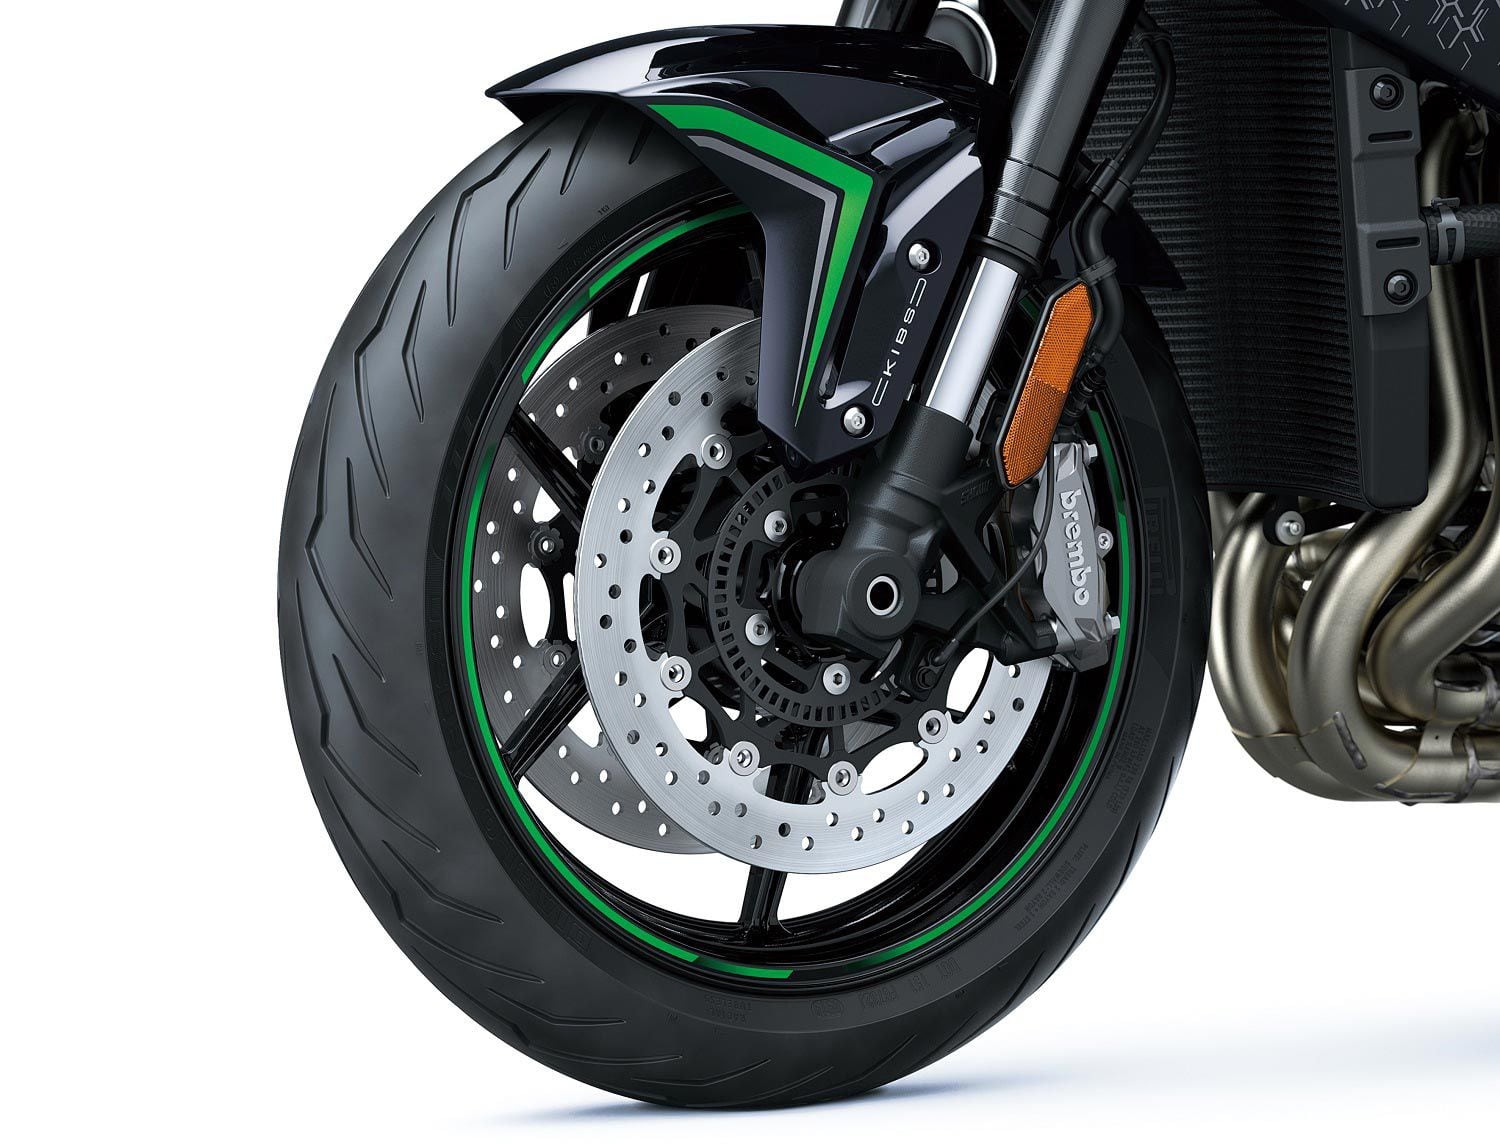 The 320mm discs and Brembo calipers are always a solid combination, and Kawasaki’s KIBS system makes the most of them.